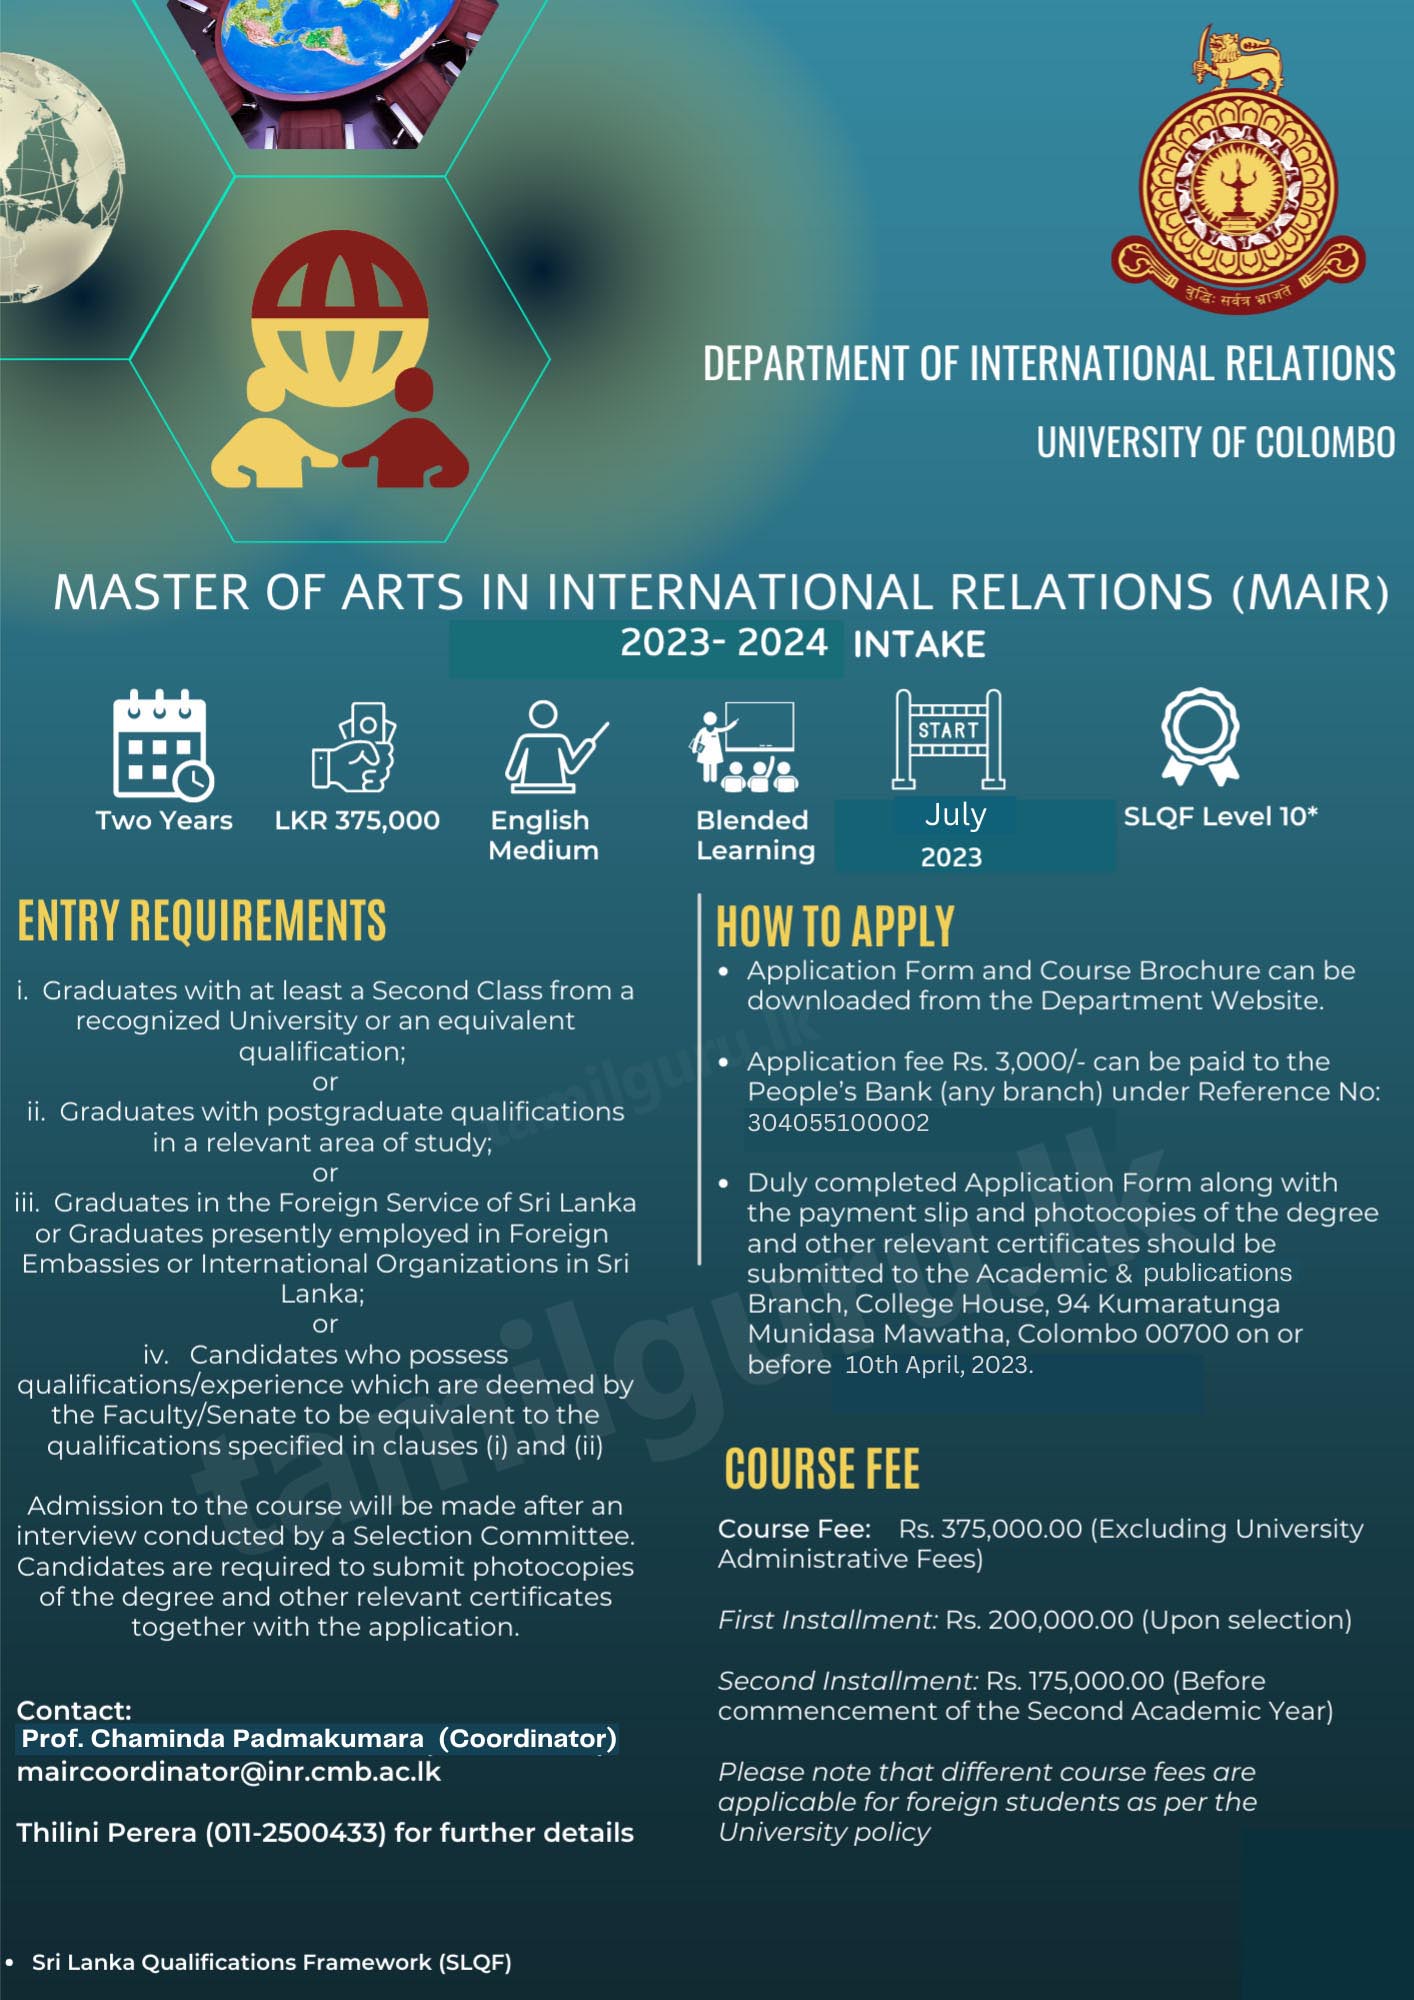 Master of Arts (MA) in International Relations 2023 - University of Colombo